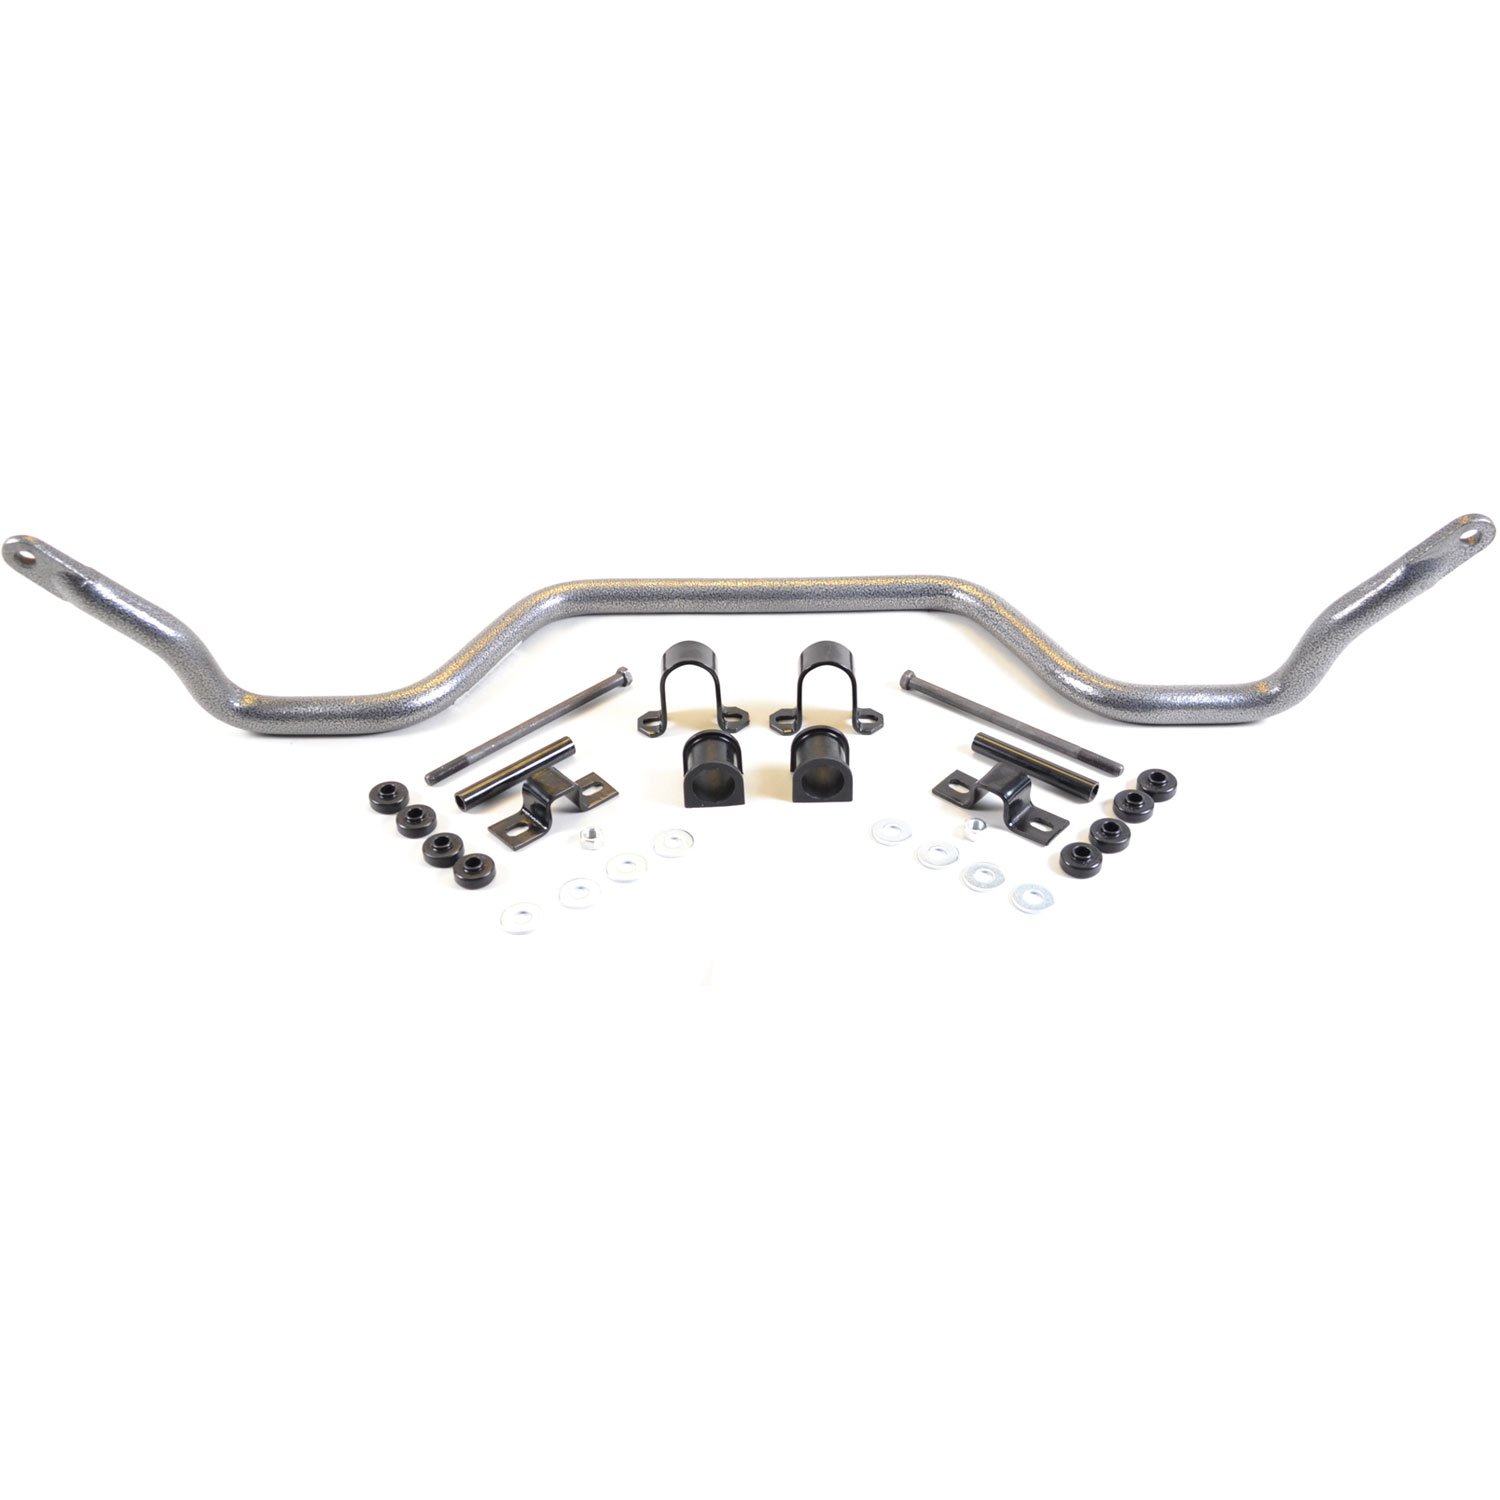 Front Sway Bar for 1979-1993 Ford Mustang and 1979-1986 Mercury Capri with V8 engine